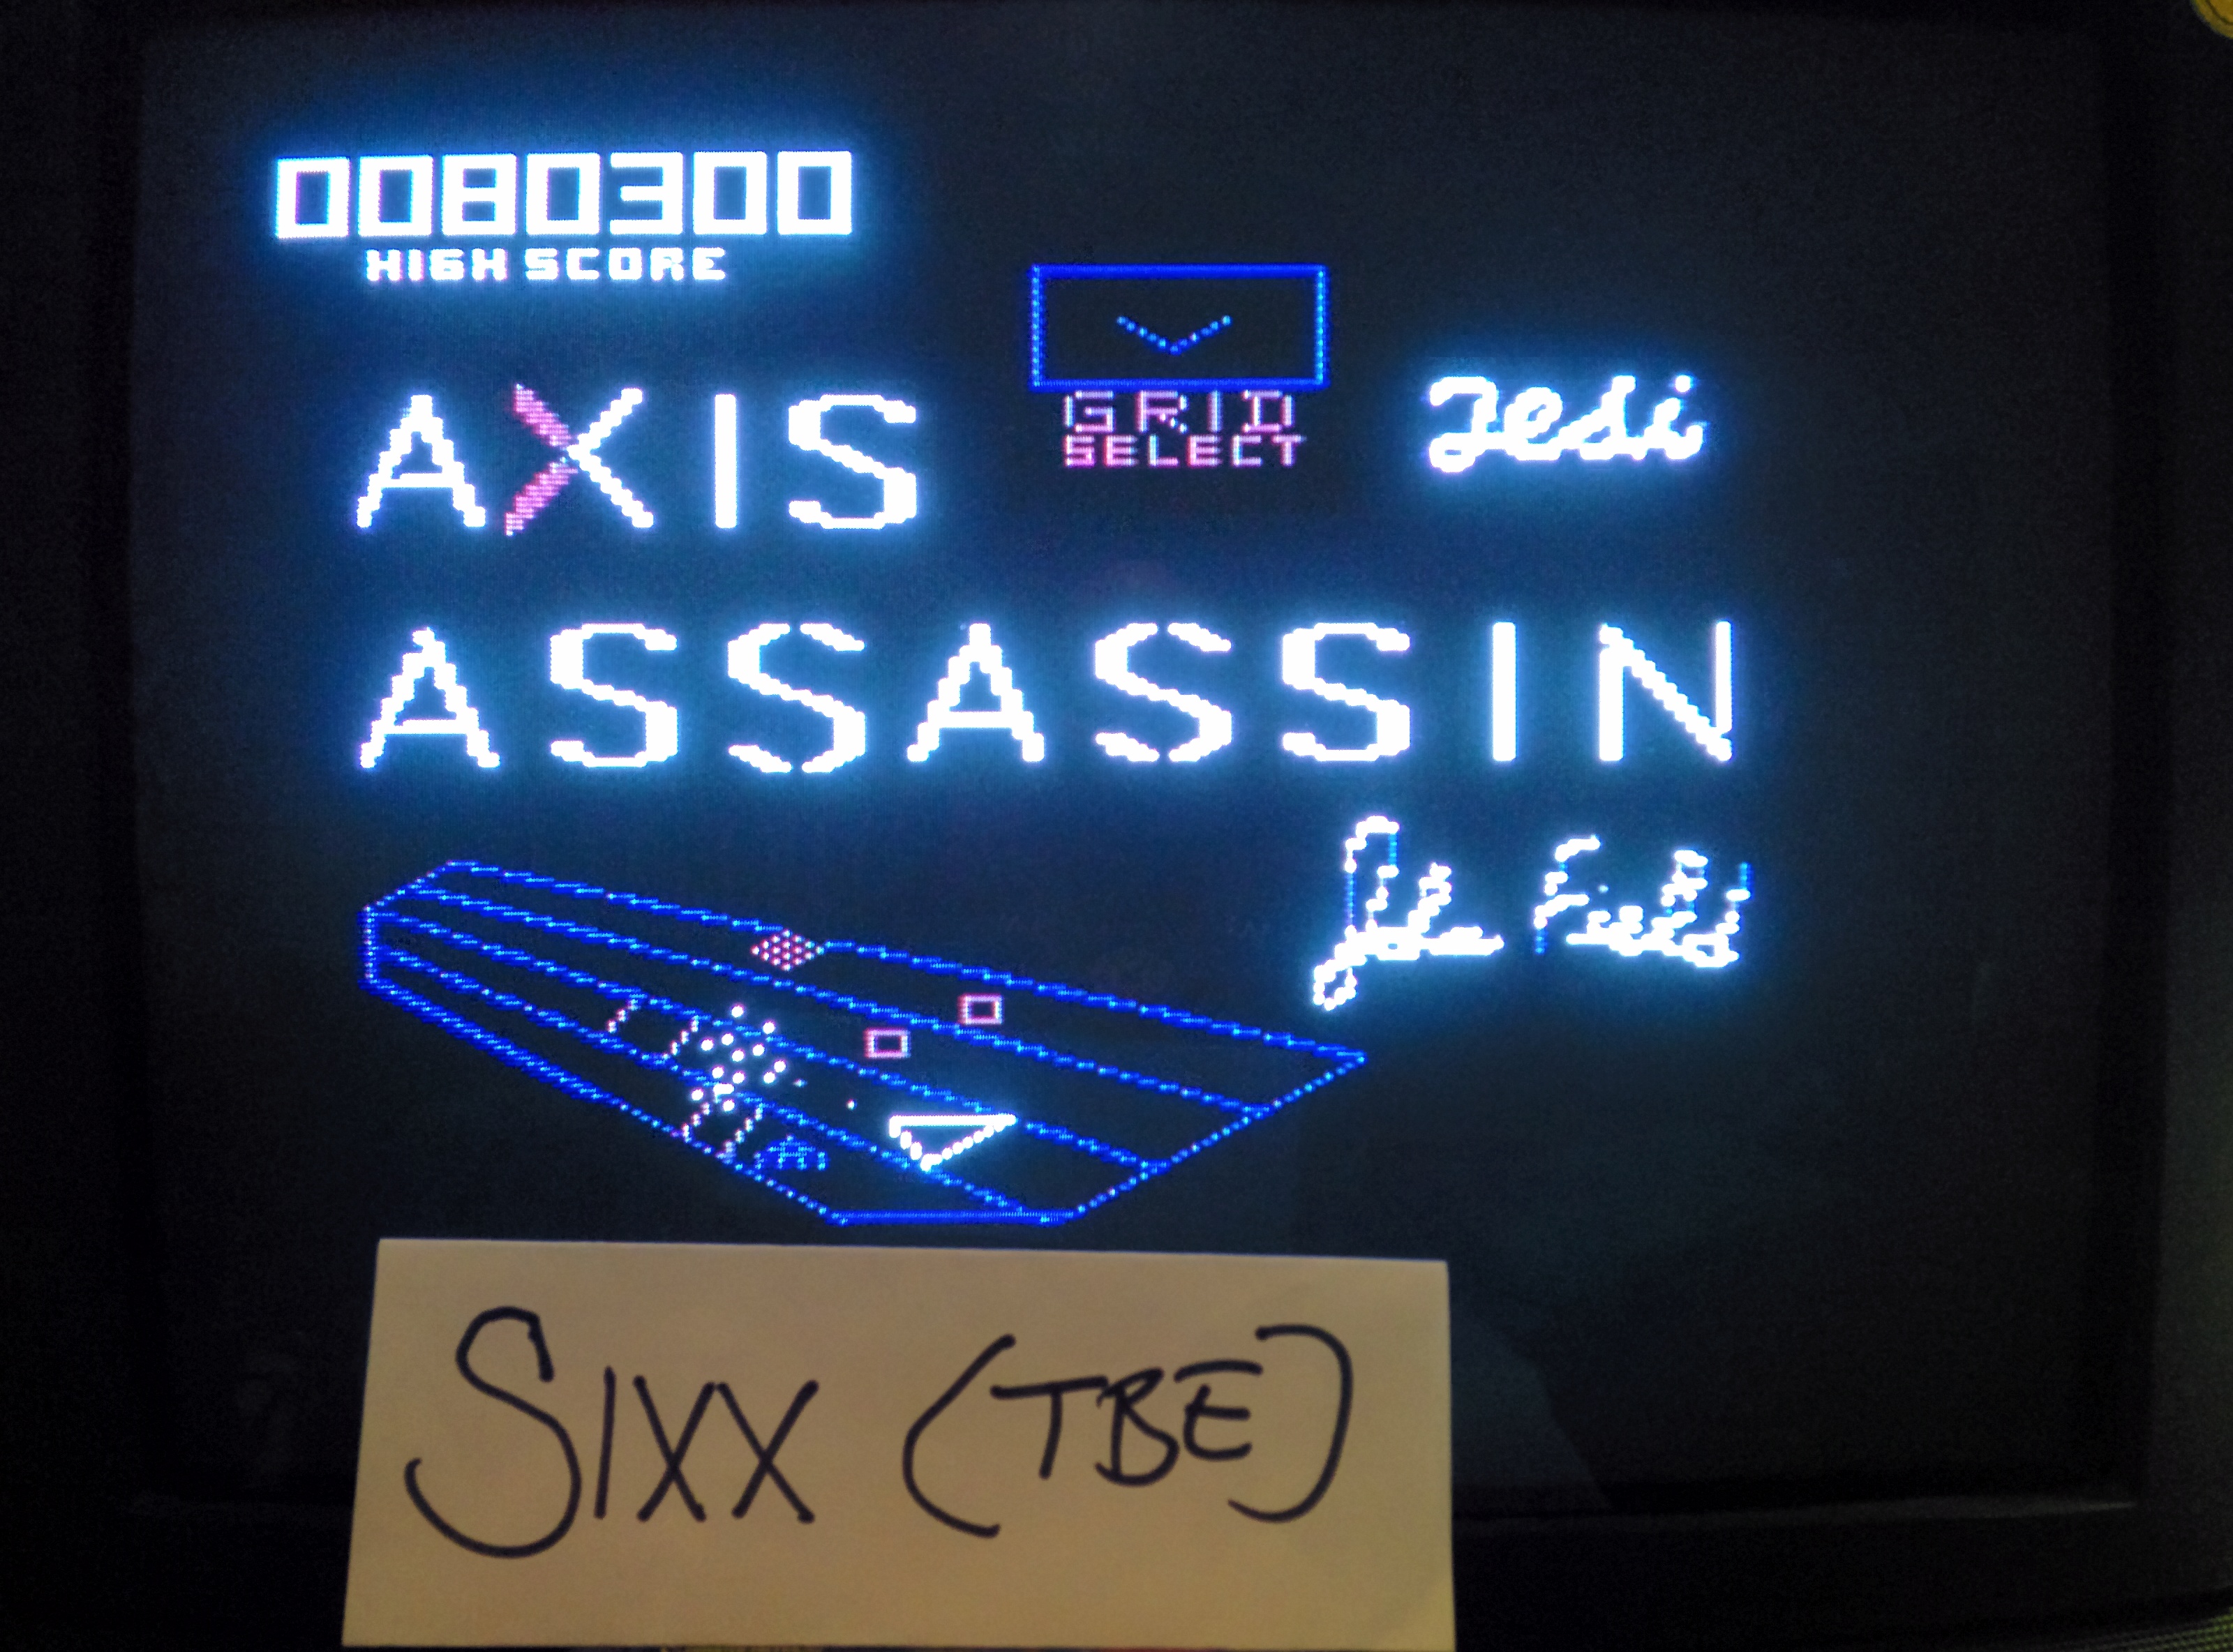 Sixx: Axis Assassin (Commodore 64) 80,300 points on 2014-05-18 15:52:17